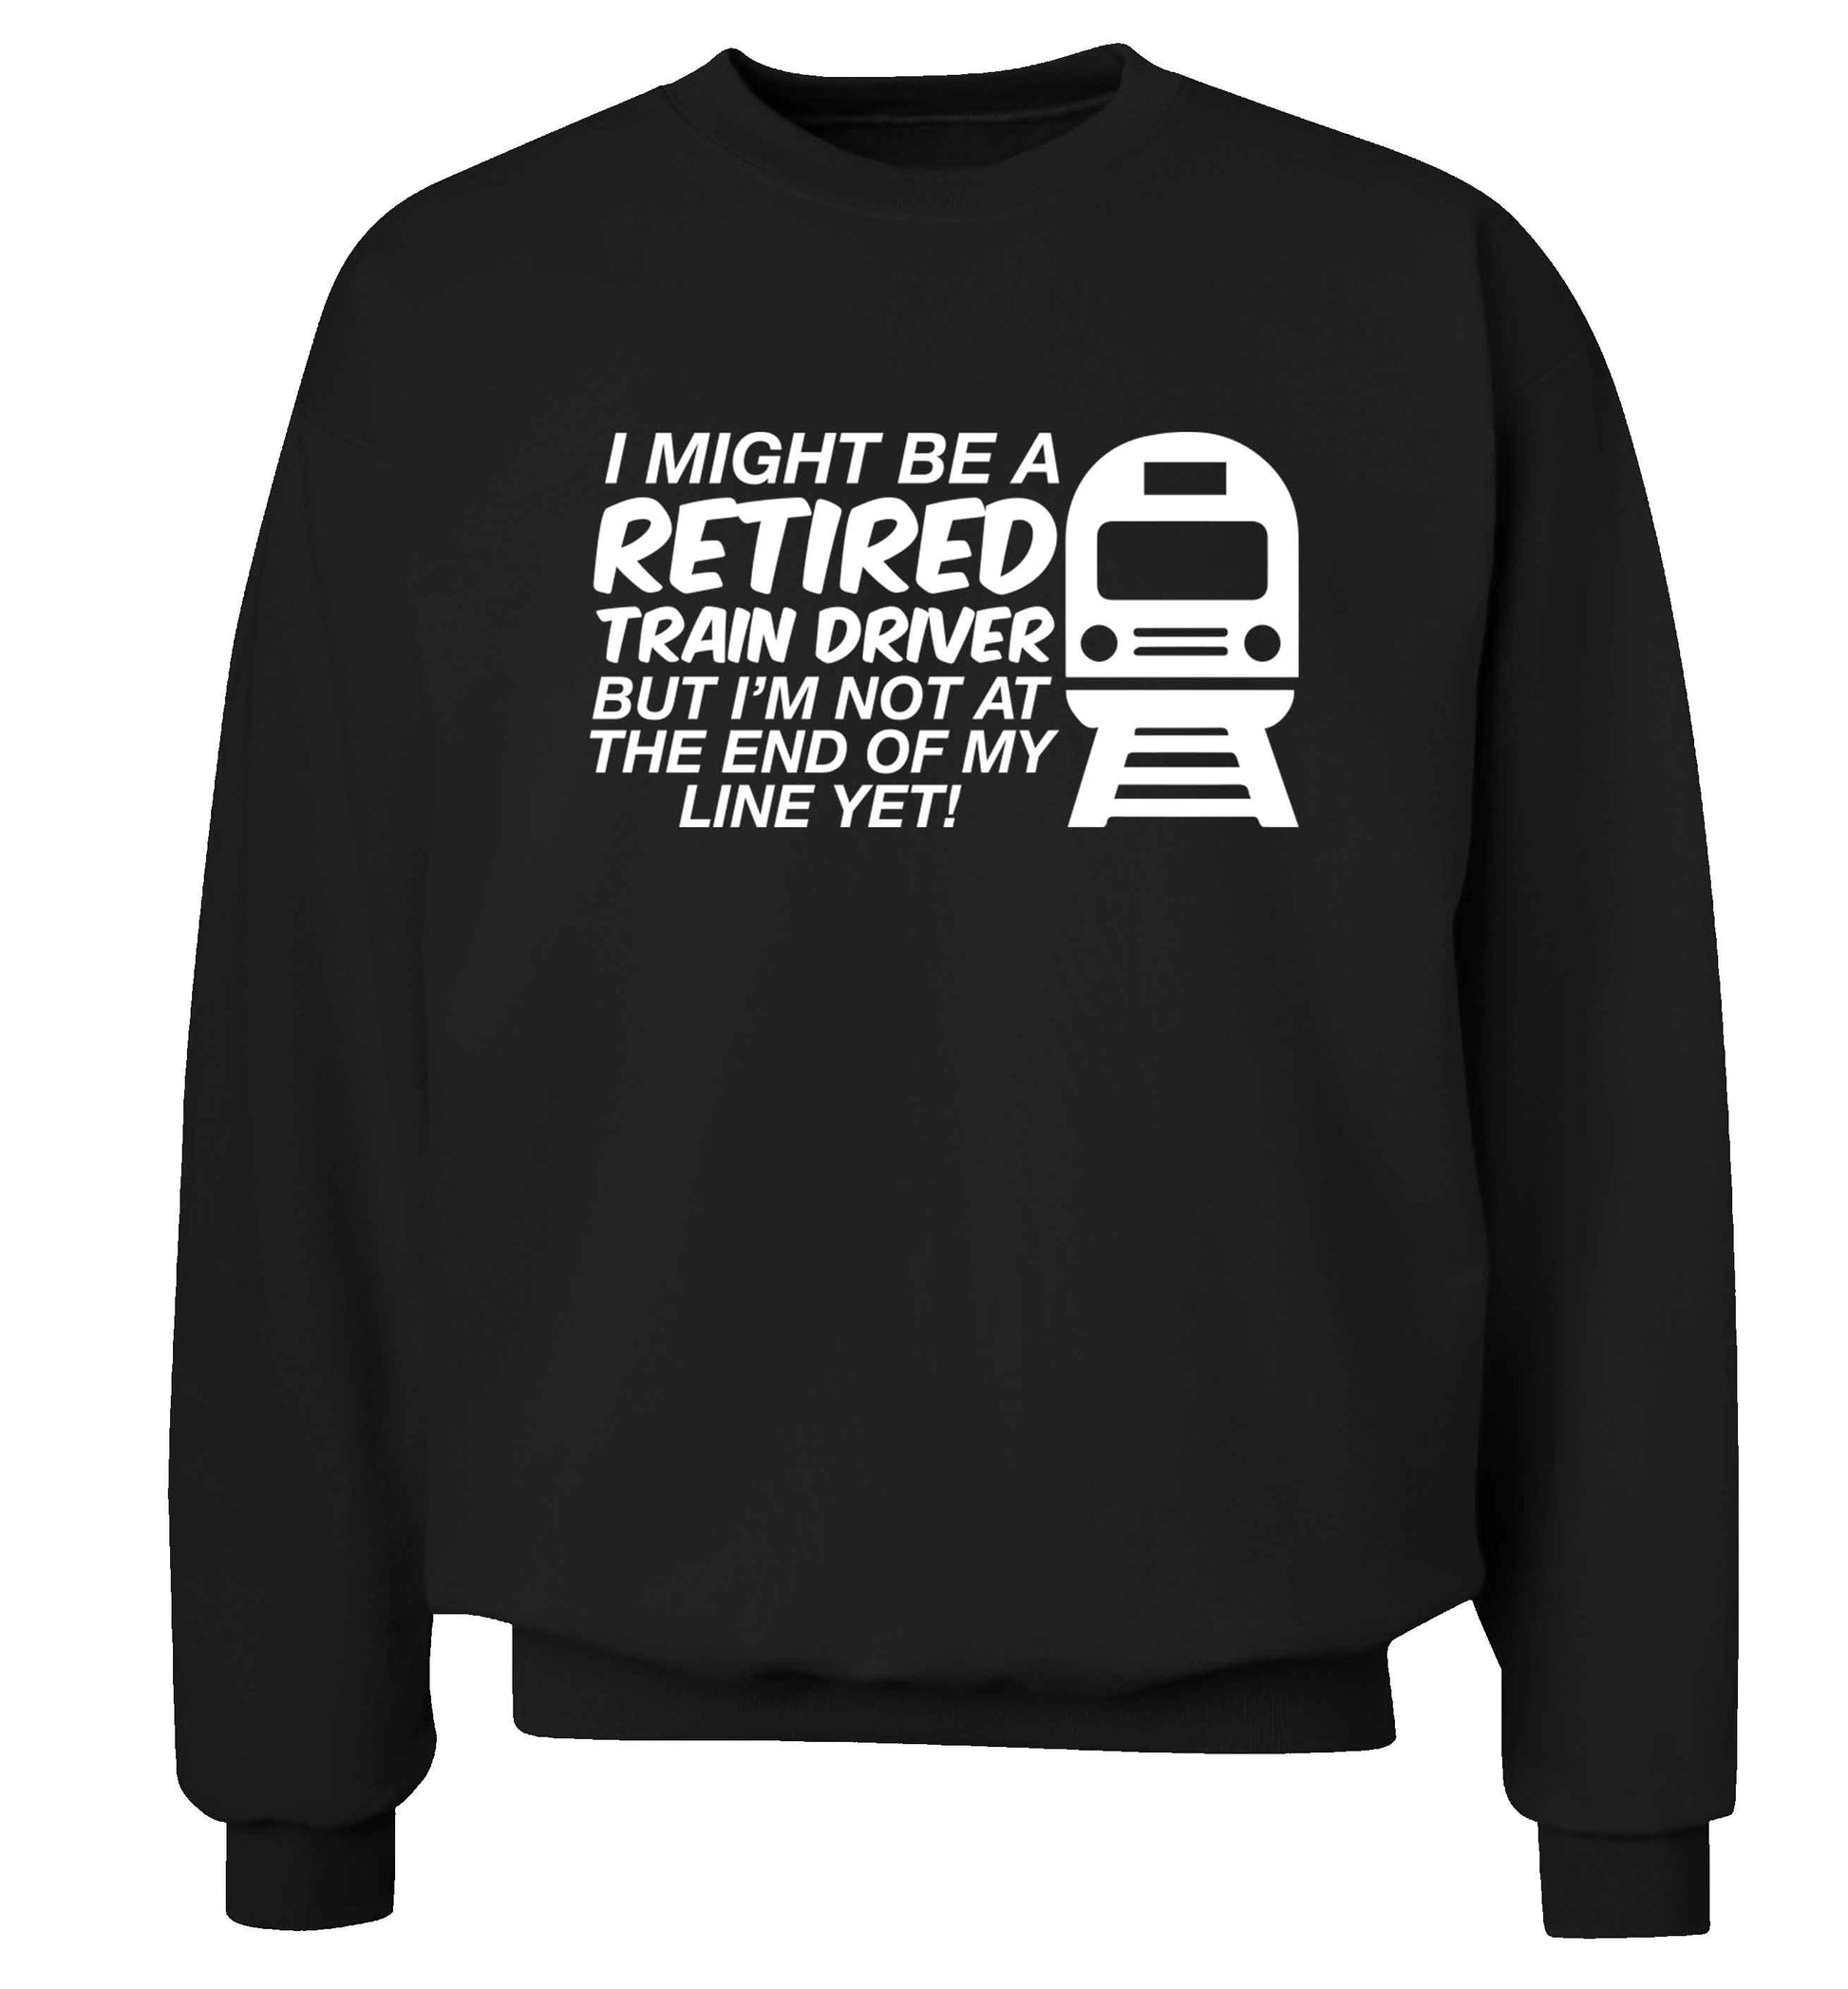 Retired train driver but I'm not at the end of my line yet Adult's unisex black Sweater 2XL